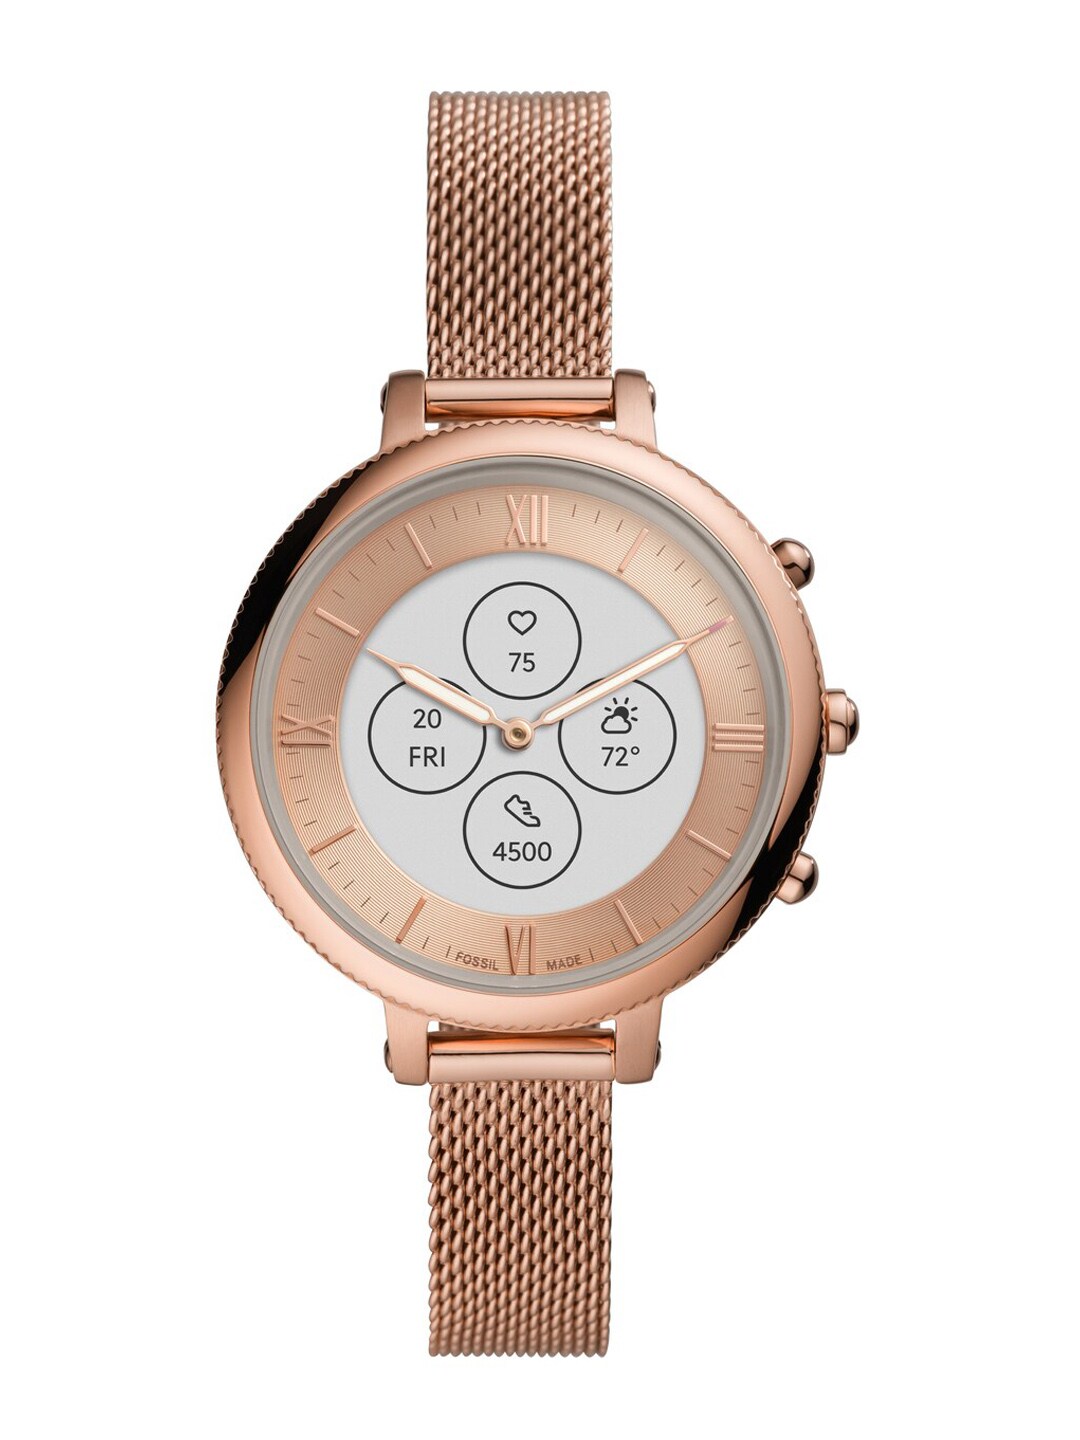 Fossil Women Rose Gold-Toned Monroe HR Smartwatch FTW7039 Price in India